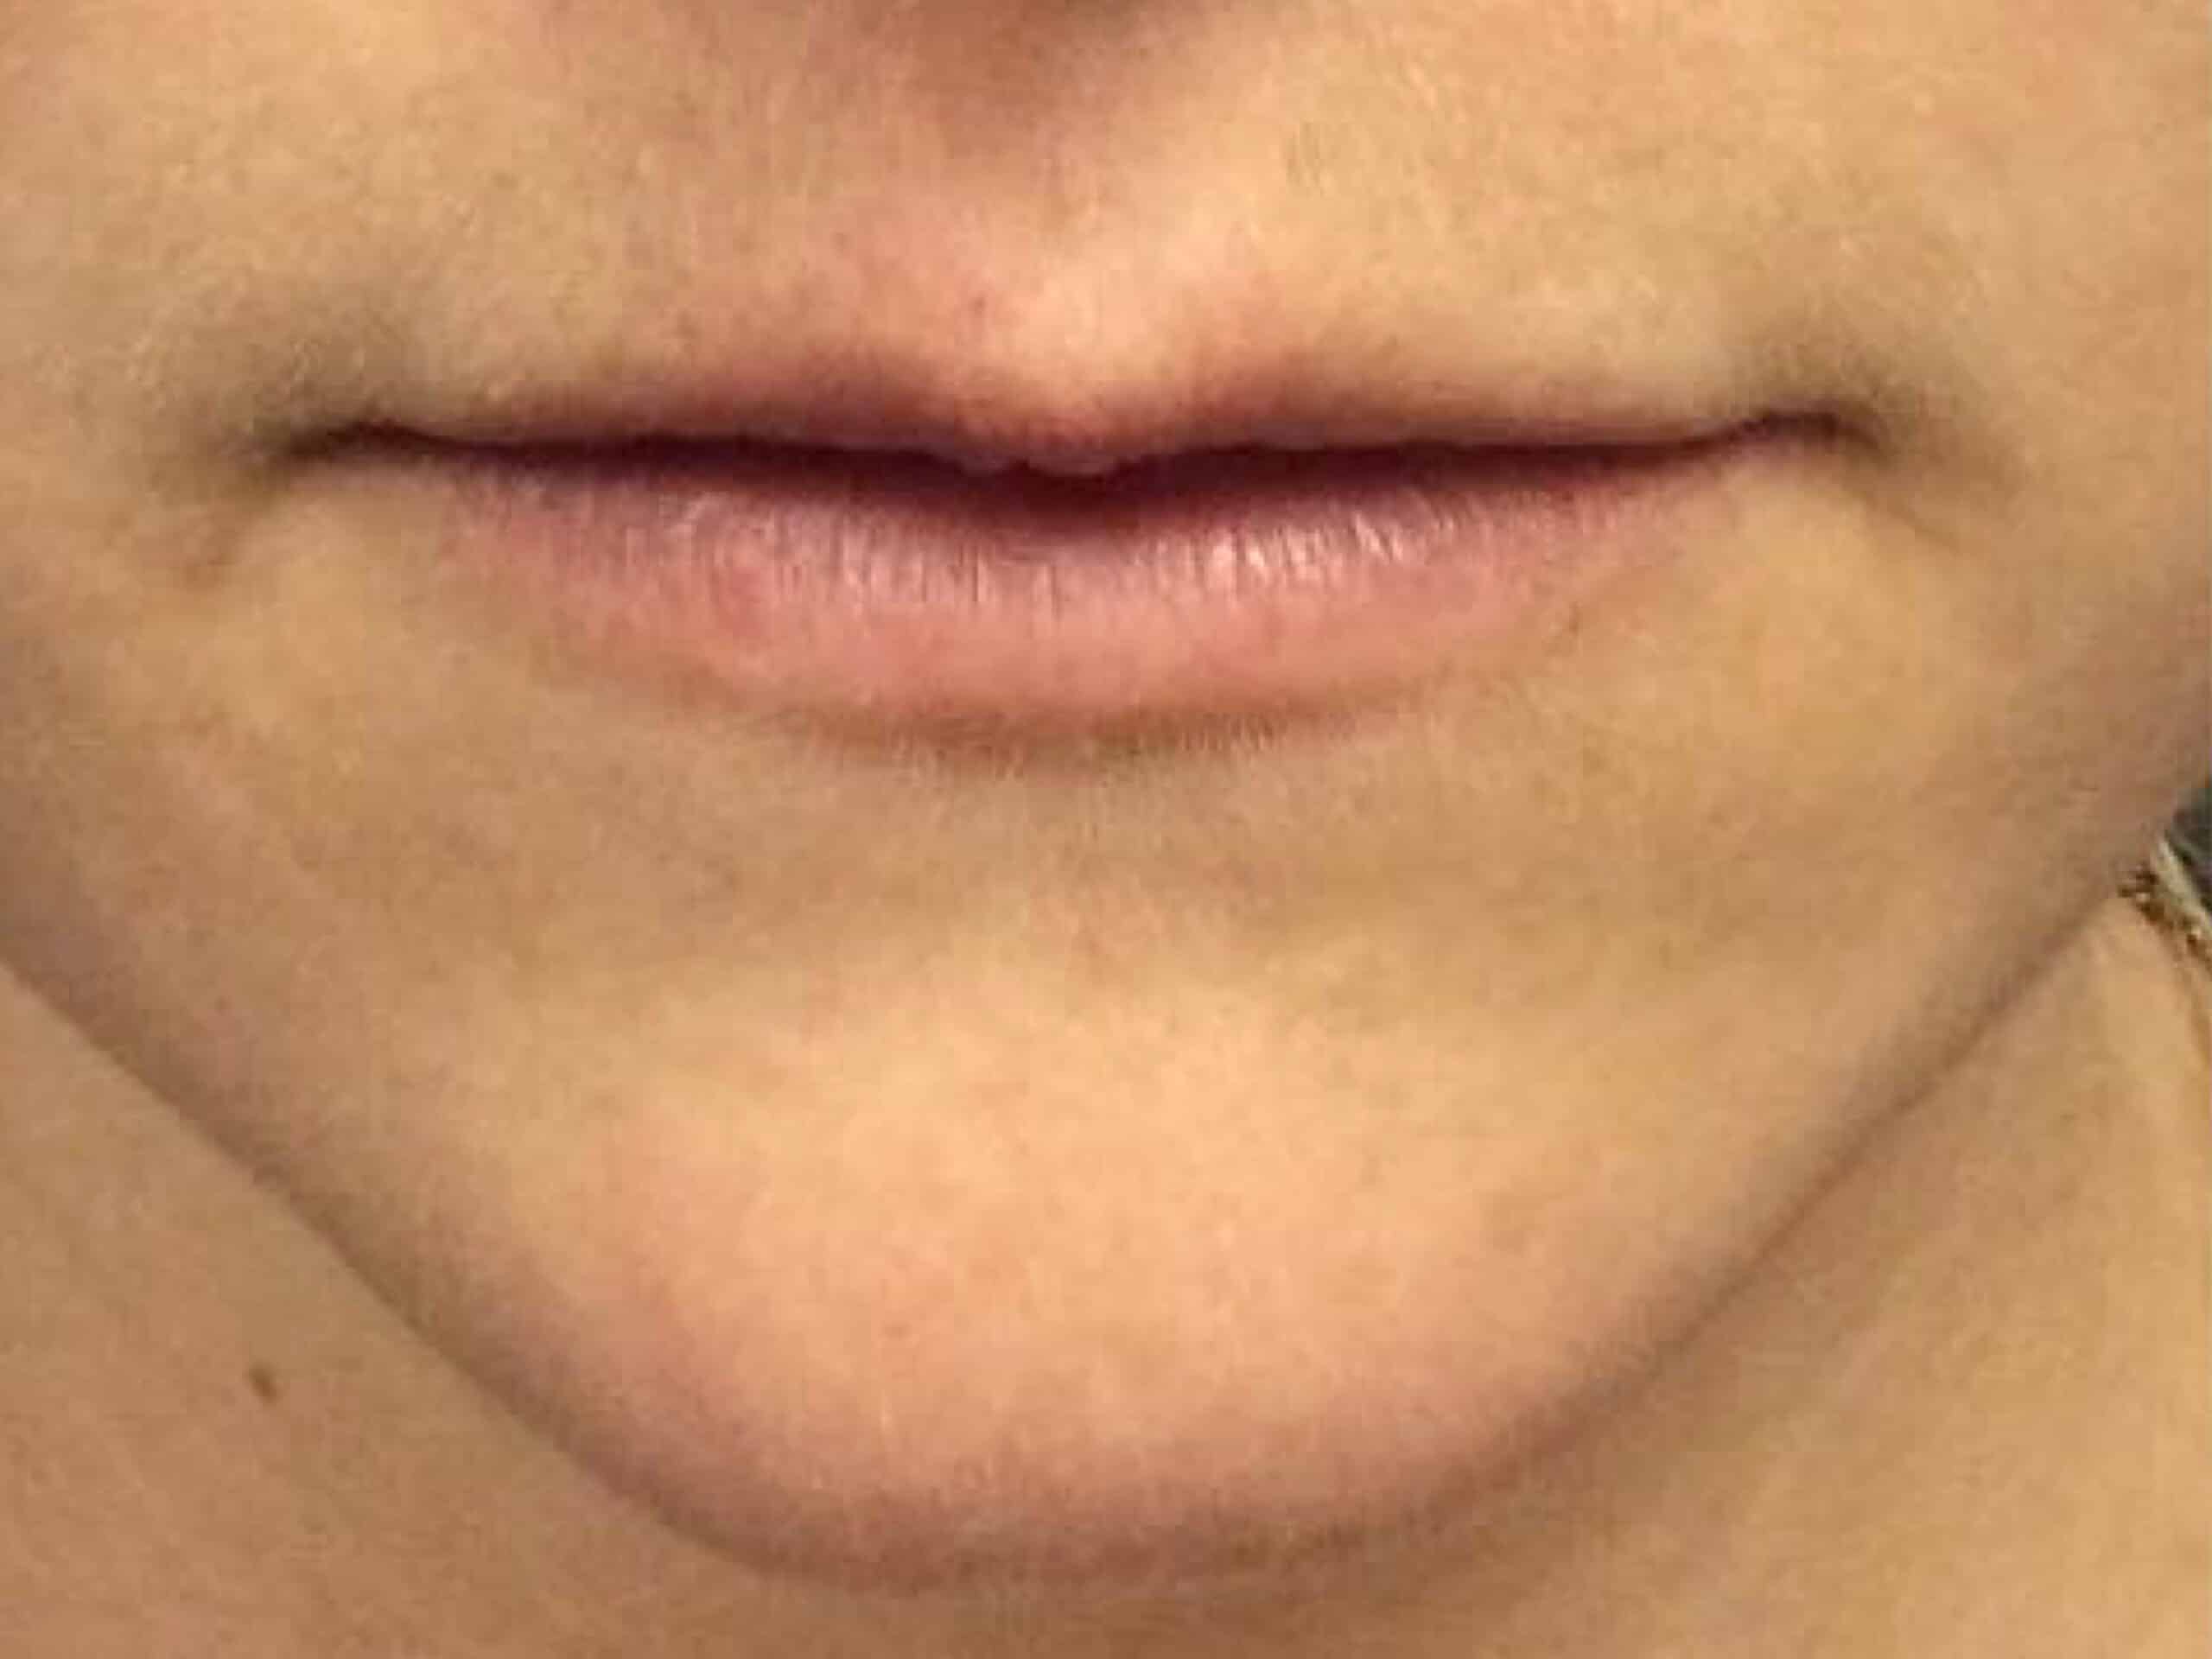 juvederm lip injections before after